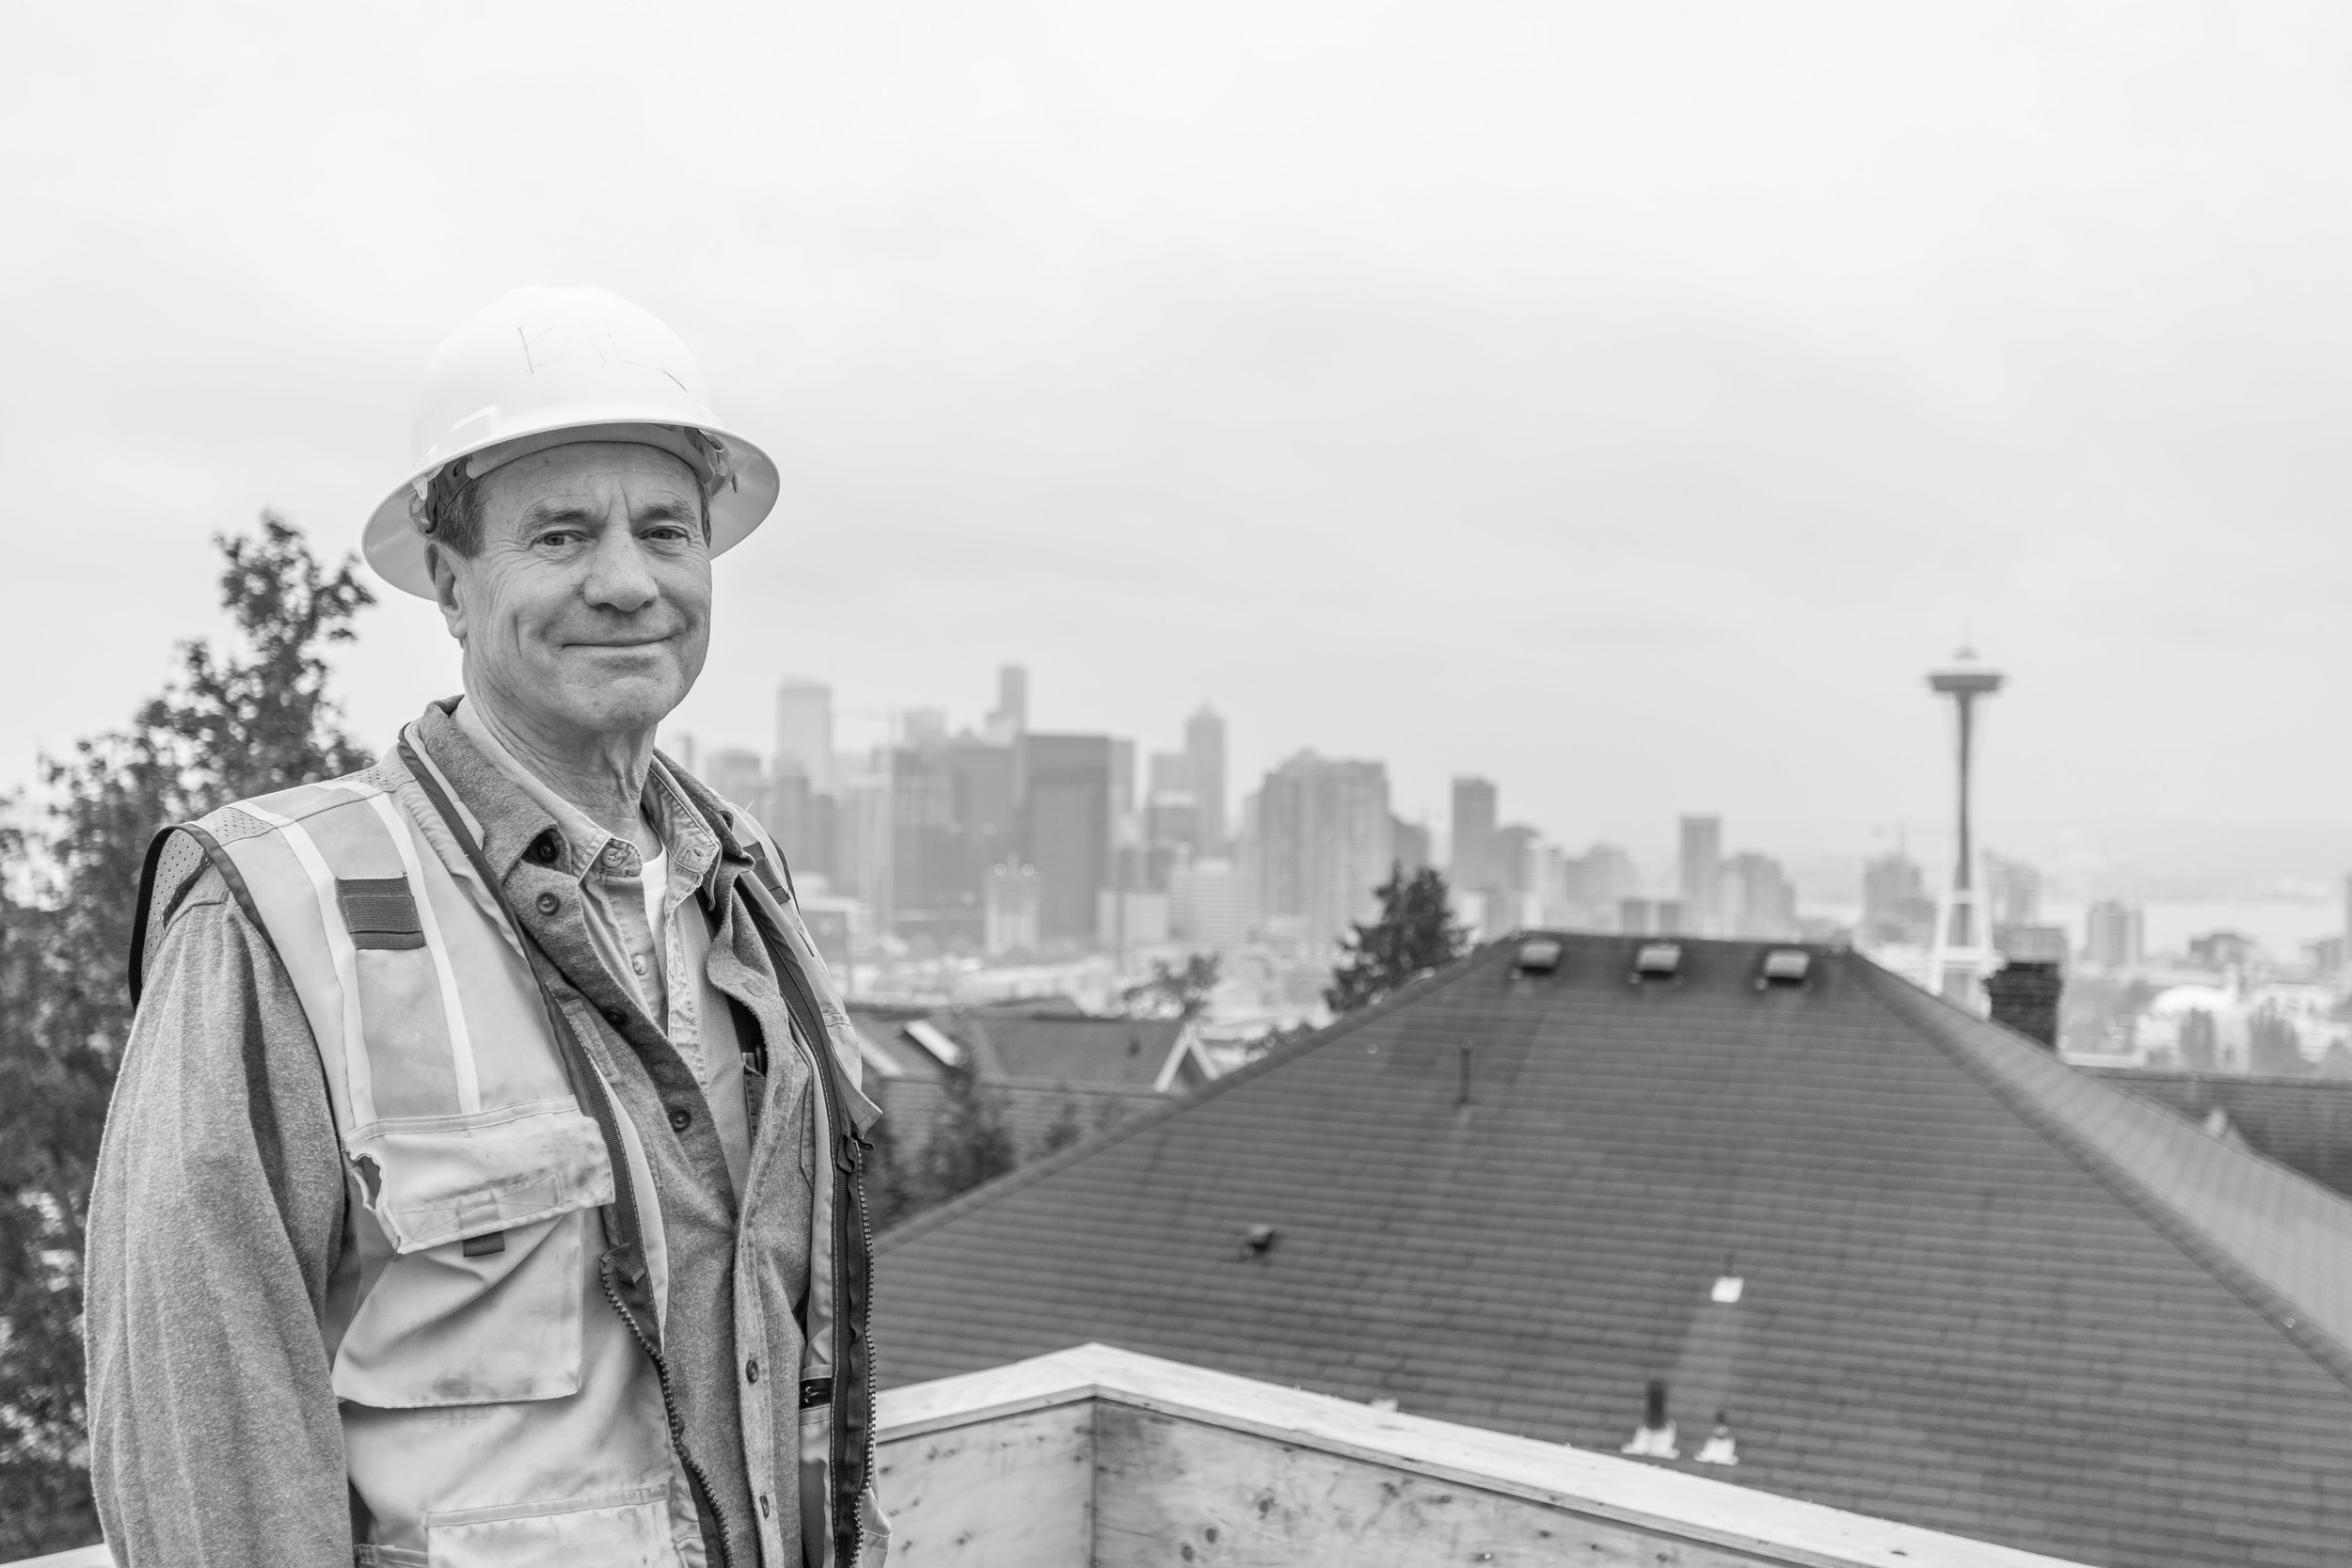 Copy of Bill Parks, Atop Lee Street Lofts During Construction